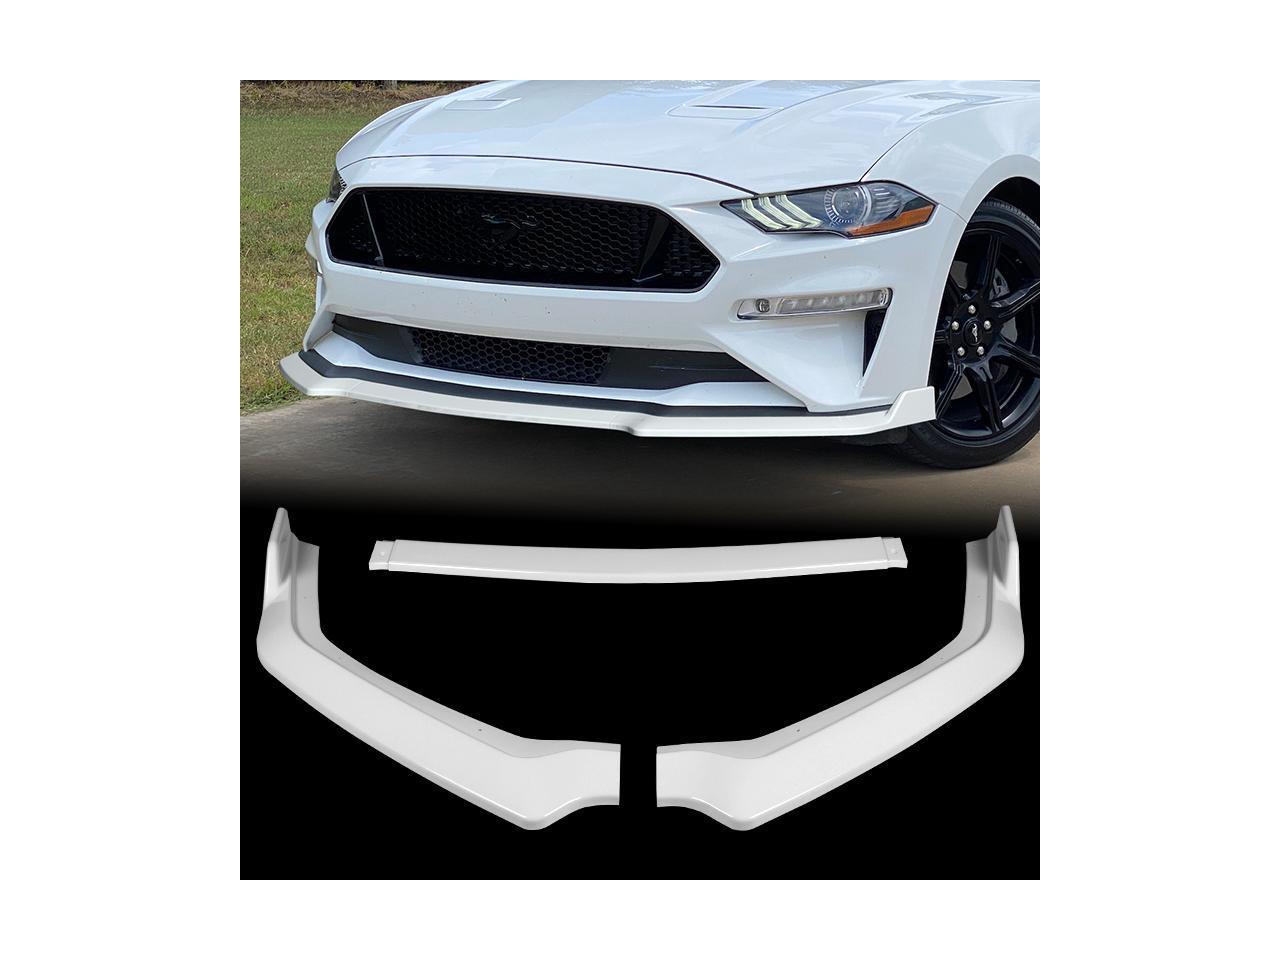 2019 Q1-TECH Front Bumper Lip Spoiler Air Chin Body Kit Splitter Unpainted Matt Black Front Bumper Lip fit for compatible with 2018-2020 Ford Mustang GT-Style 